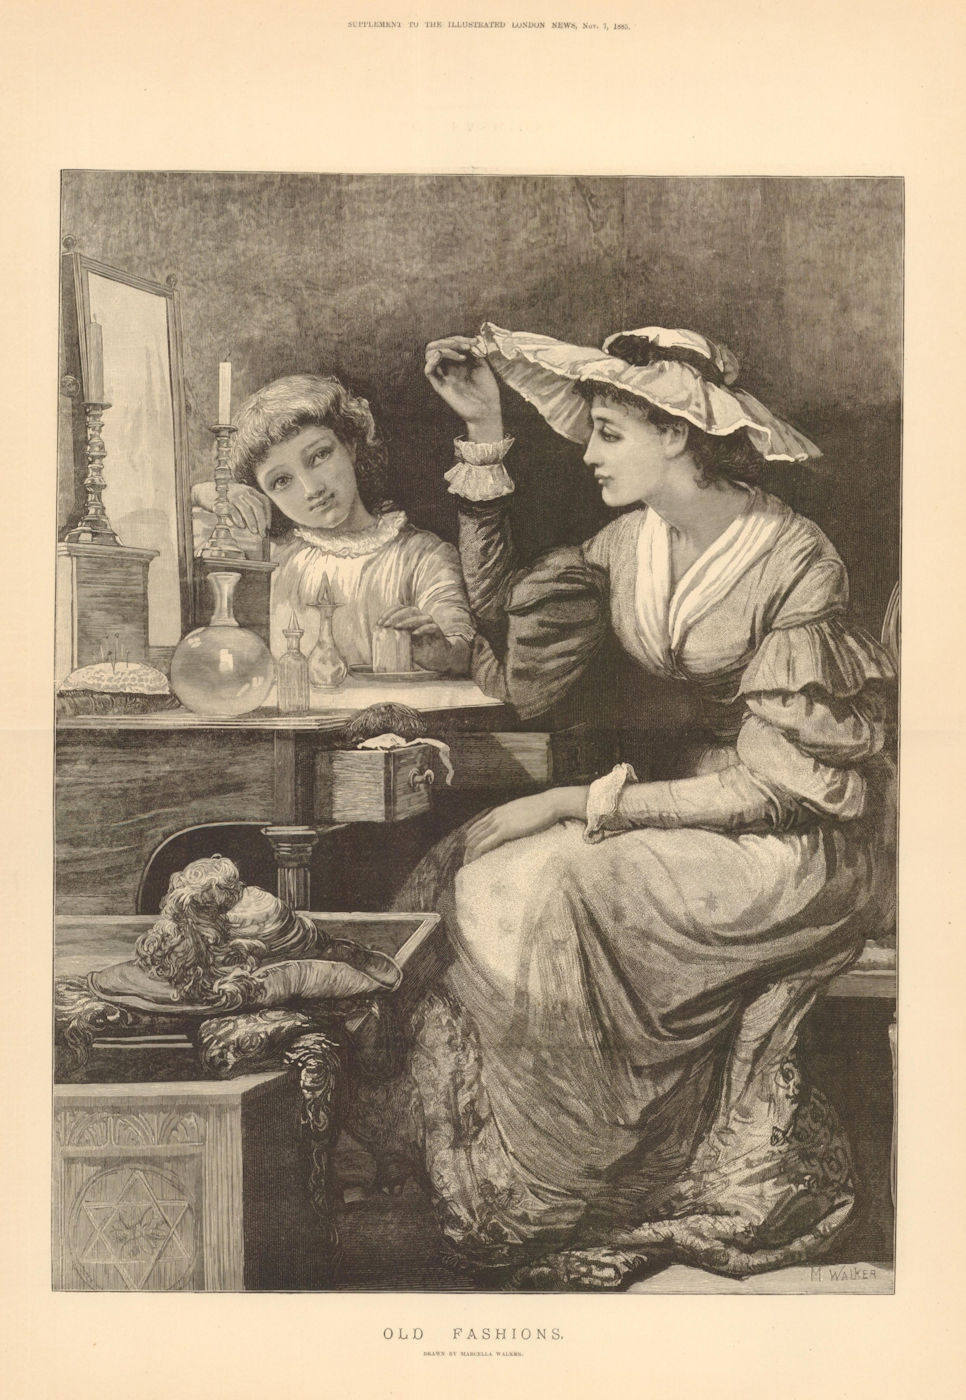 Associate Product Old fashions. Pretty Ladies. Fine arts 1885 antique ILN full page print